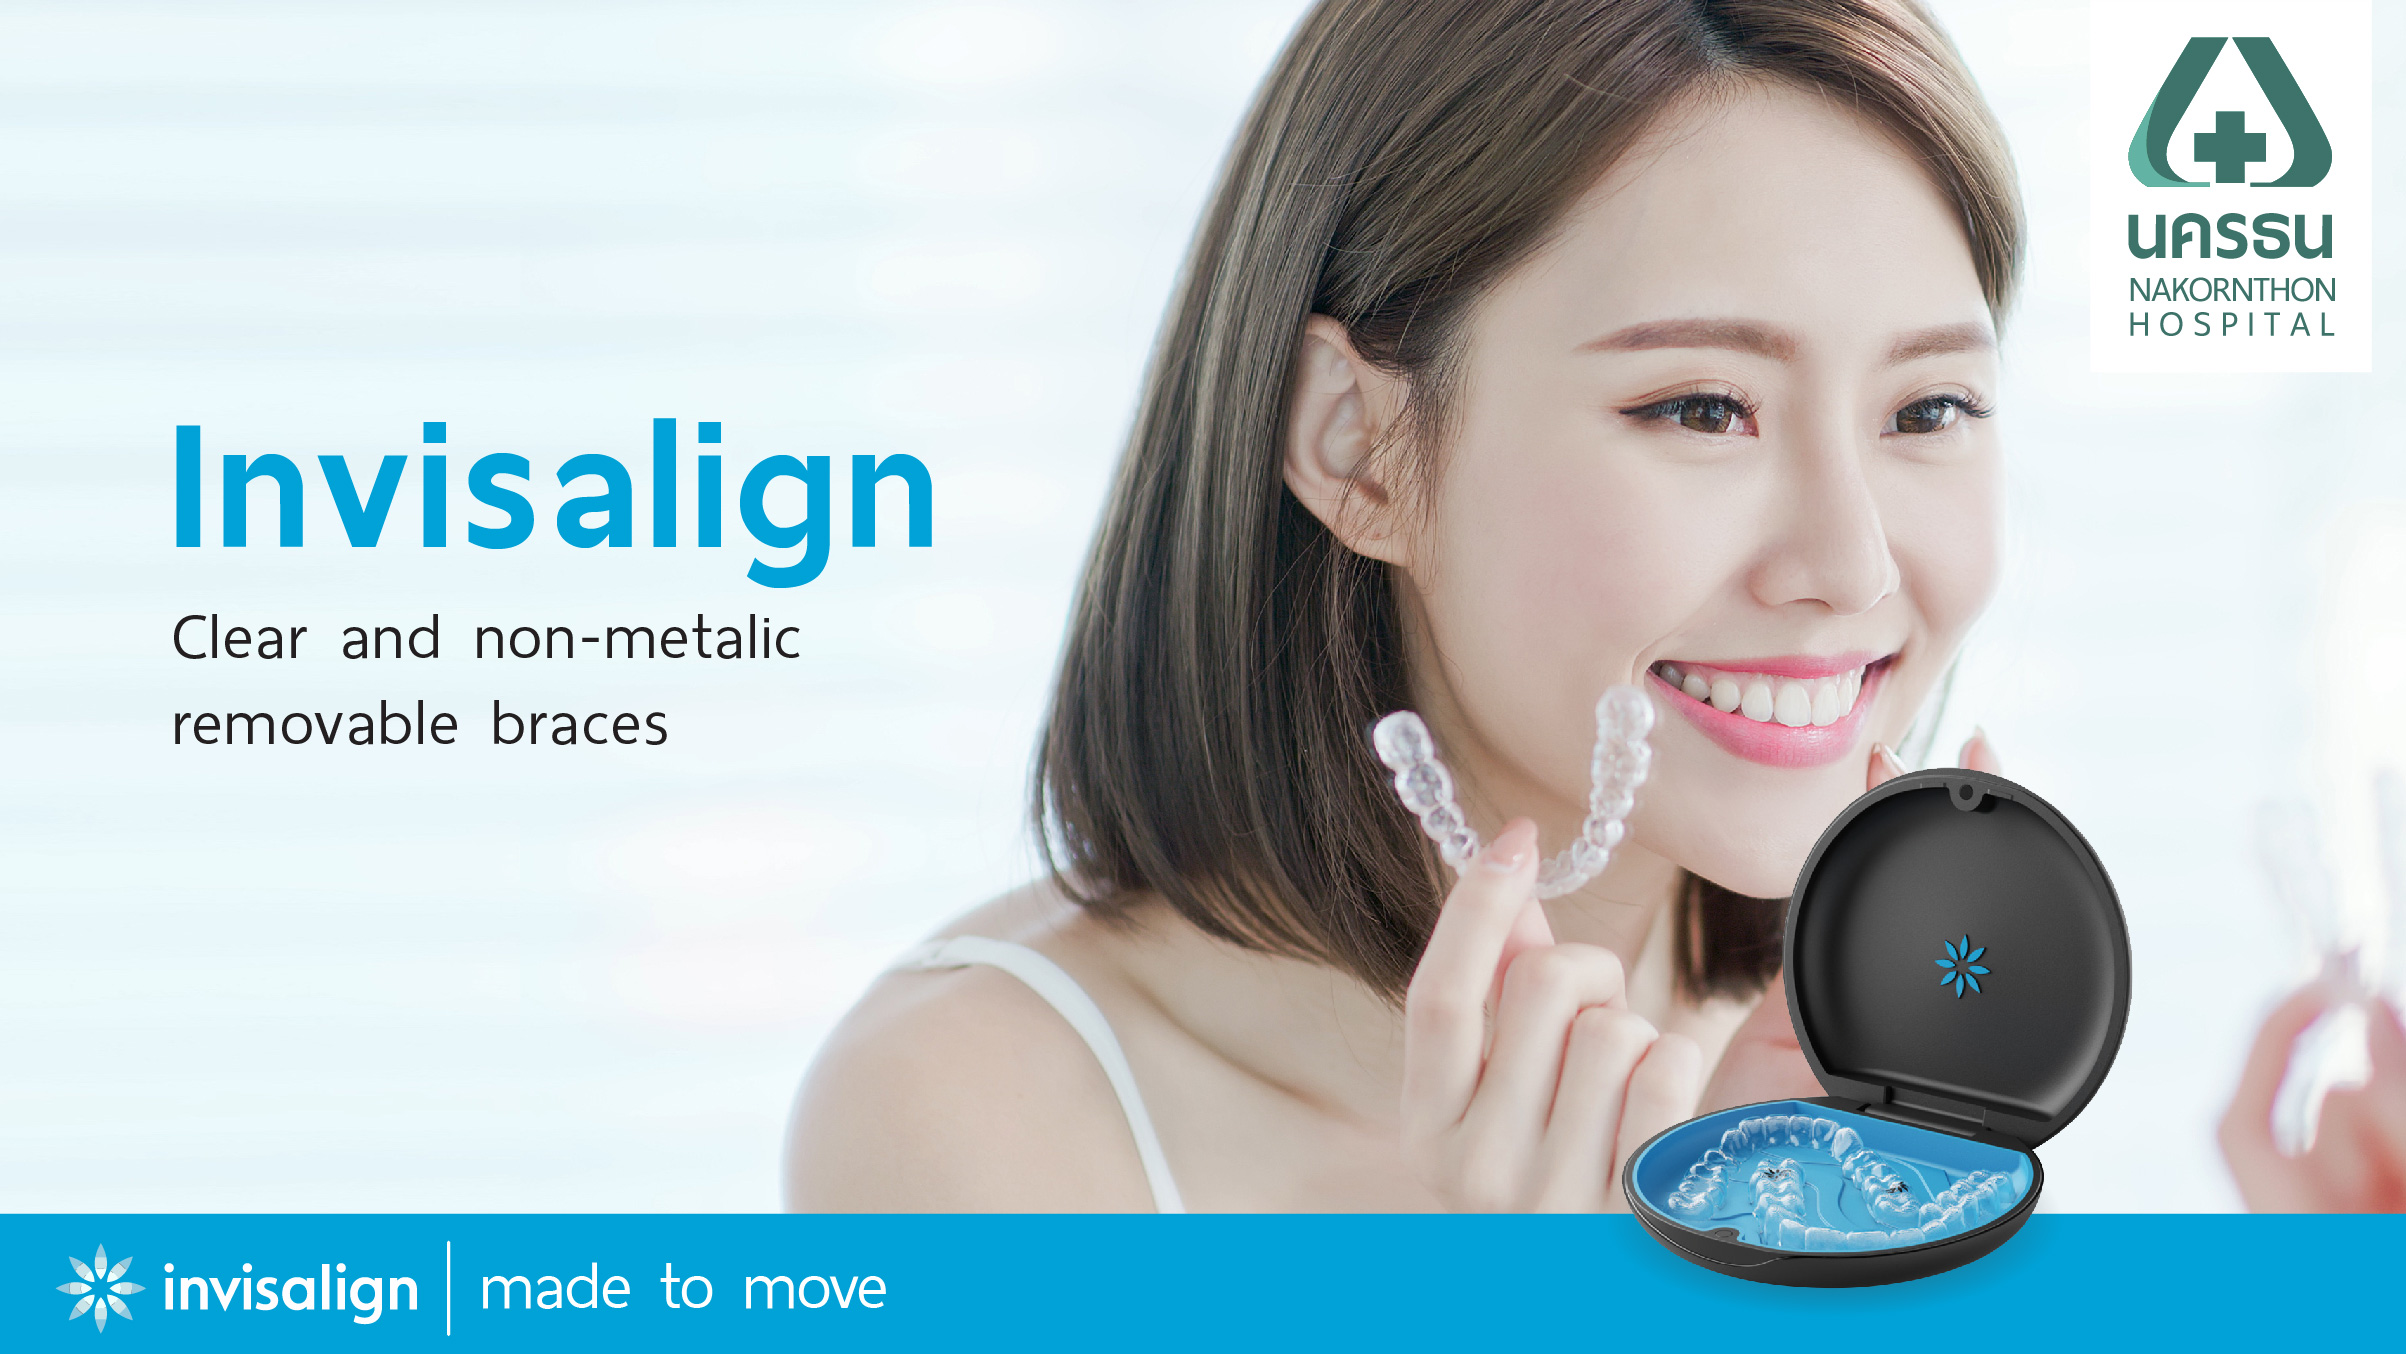 What are the advantages of Invisalign, clear and removable braces?